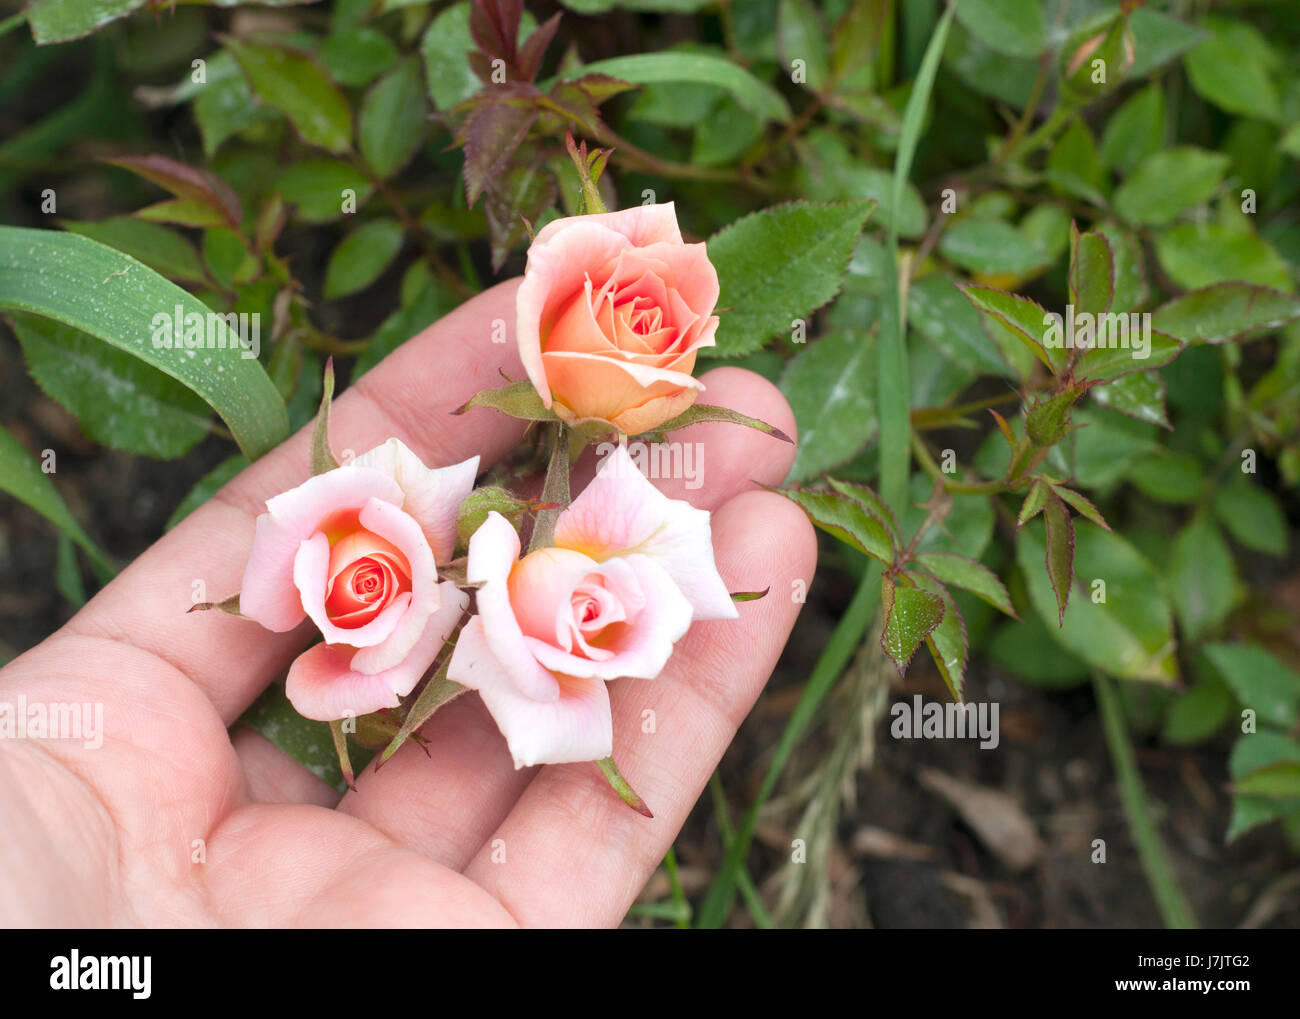 Close up image of pink little roses on woman hands in the garden Stock Photo